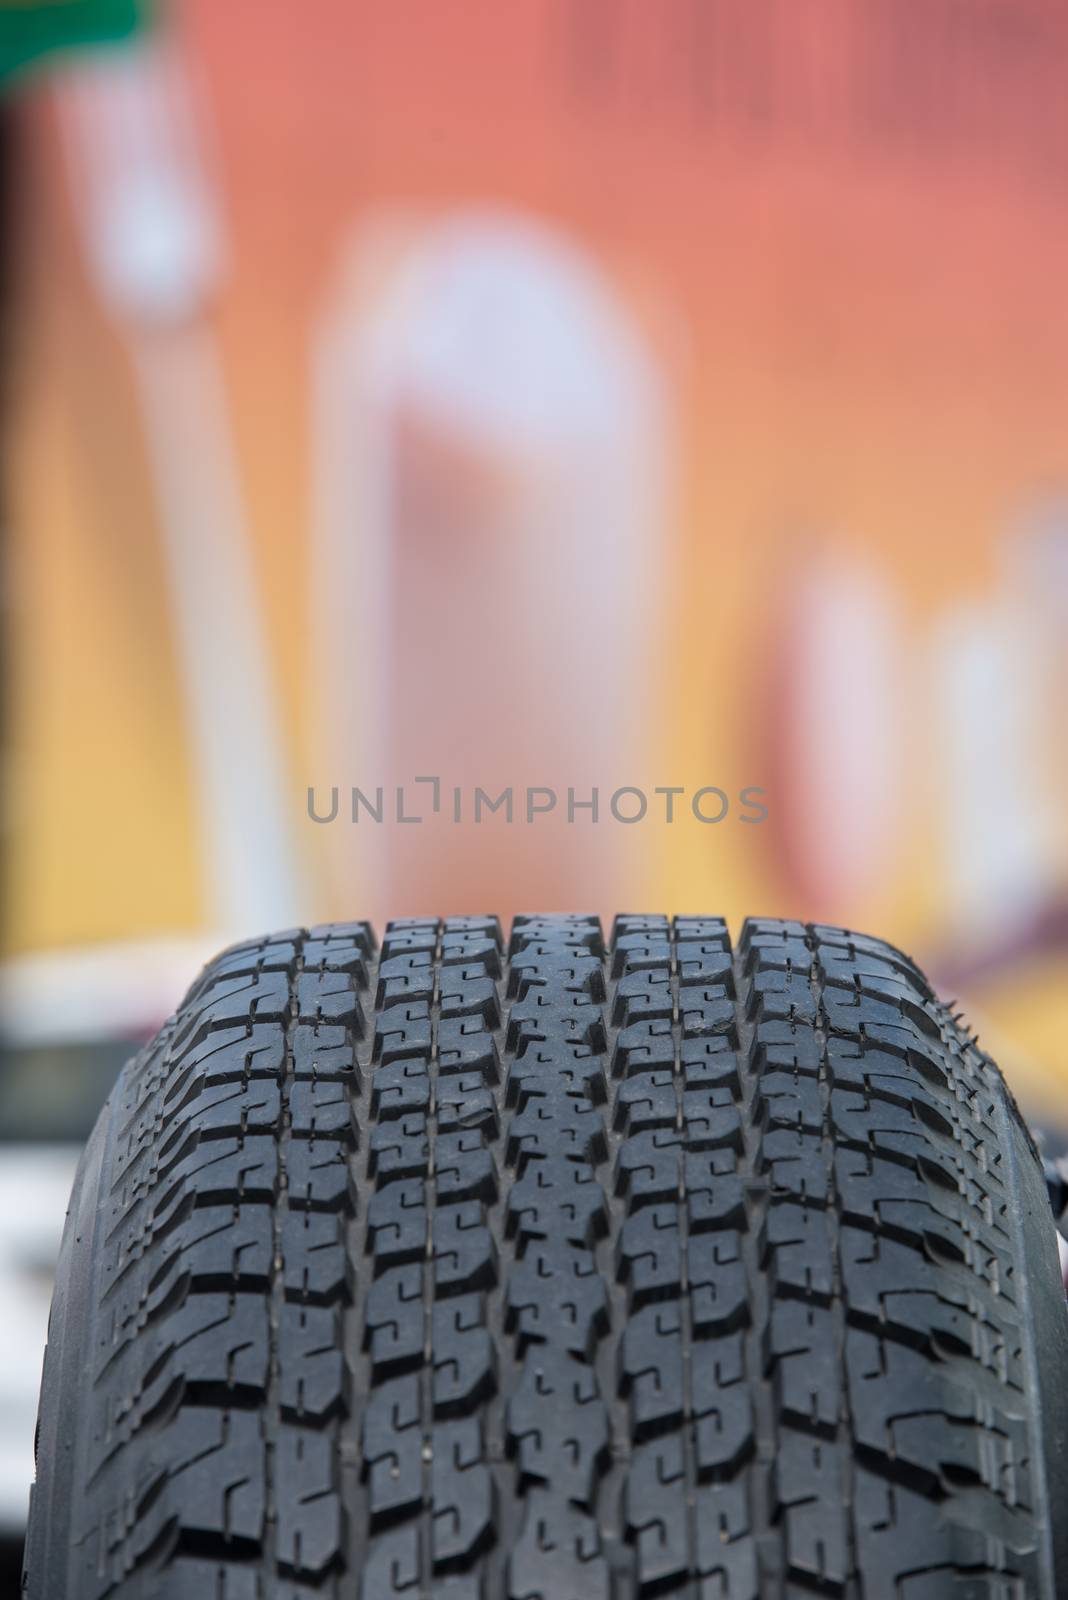 used tire textured by antpkr